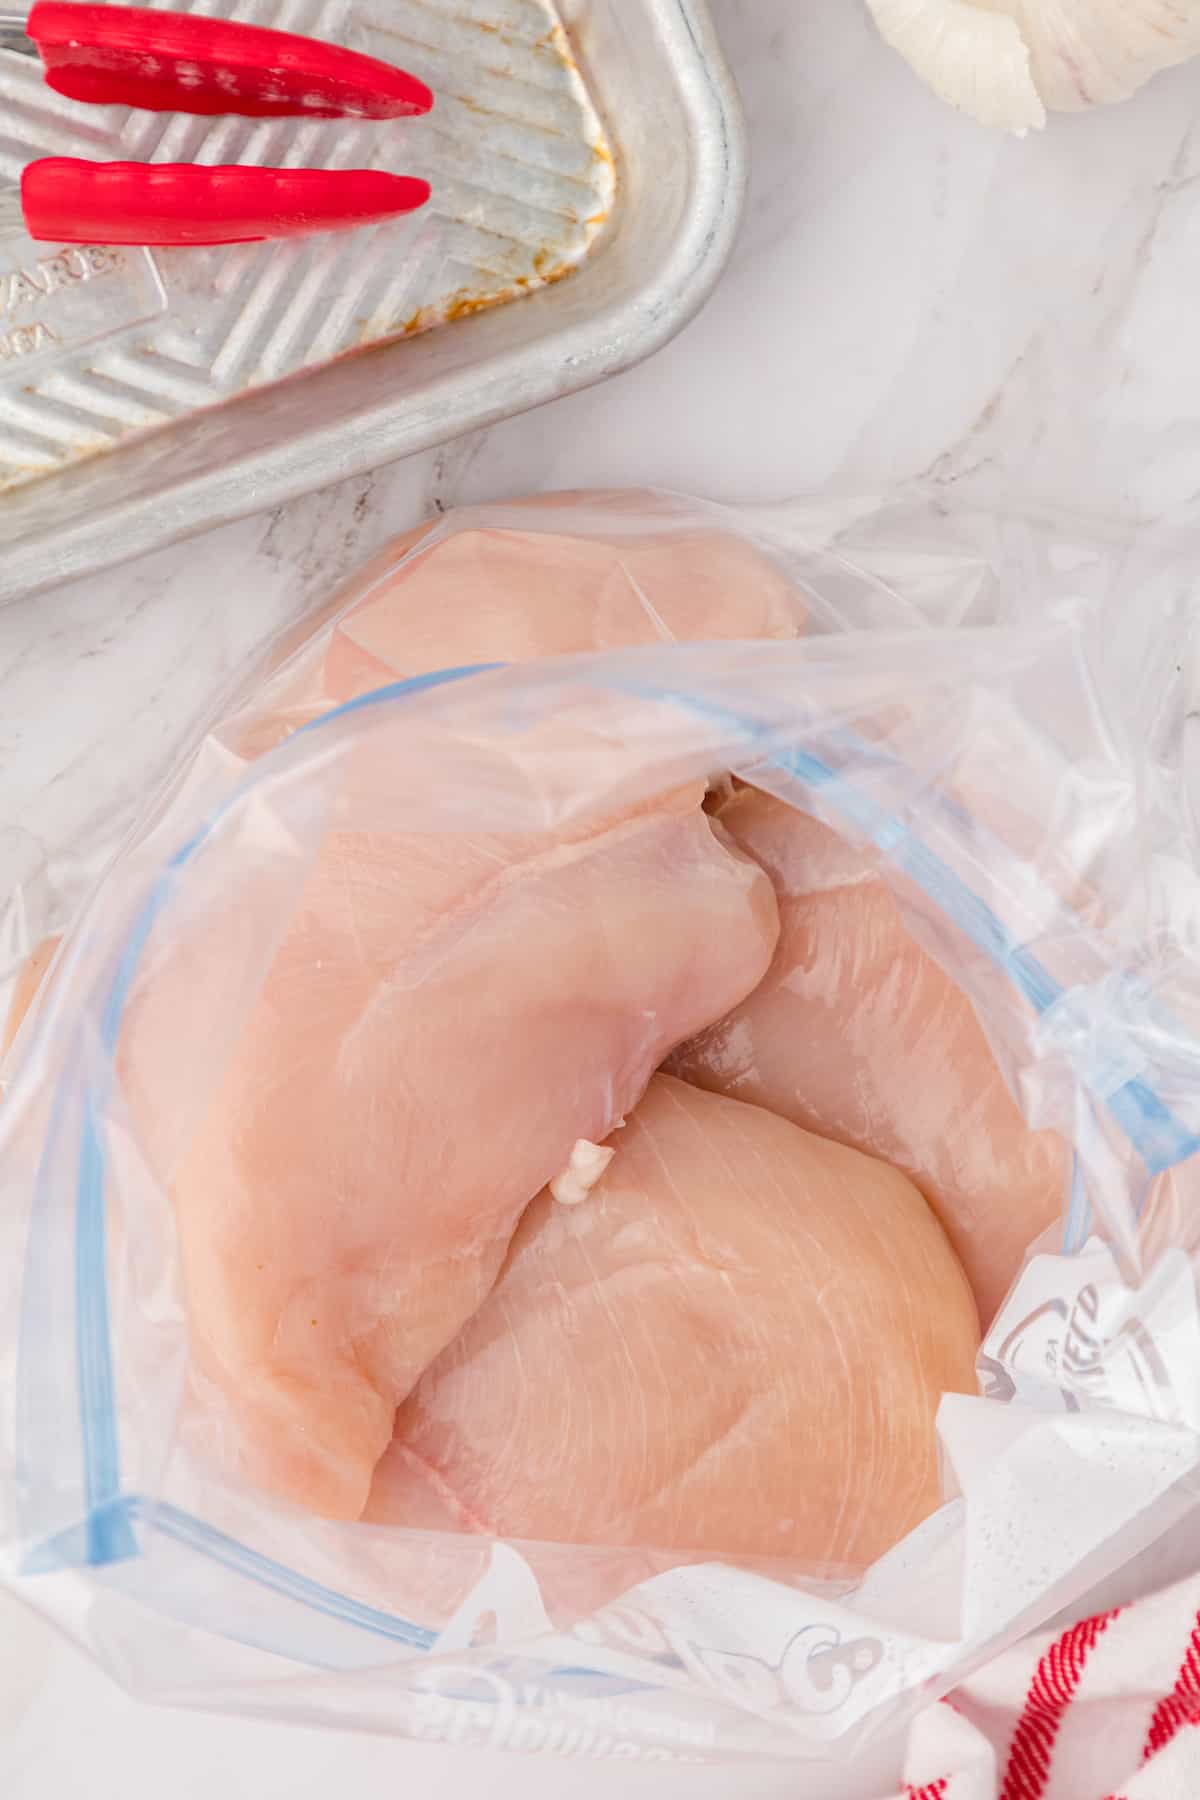 place chicken in a zippered plastic bag